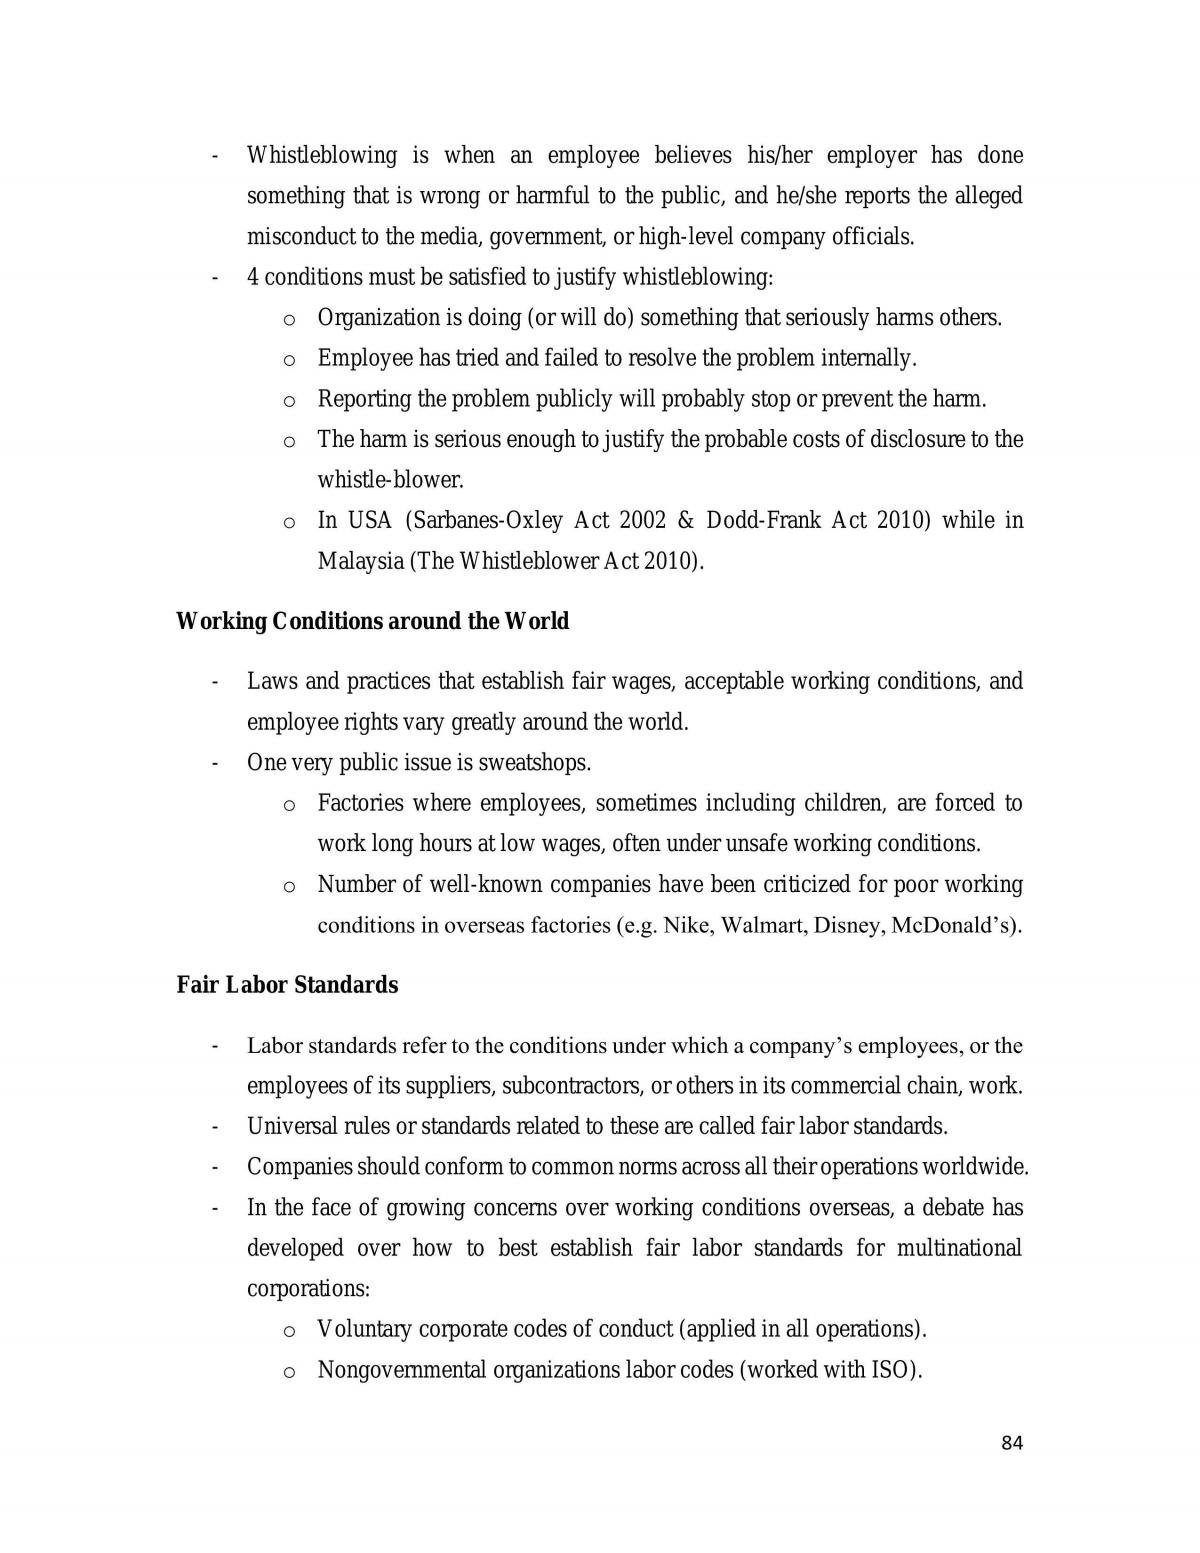 Business and Society Full Notes - Page 84